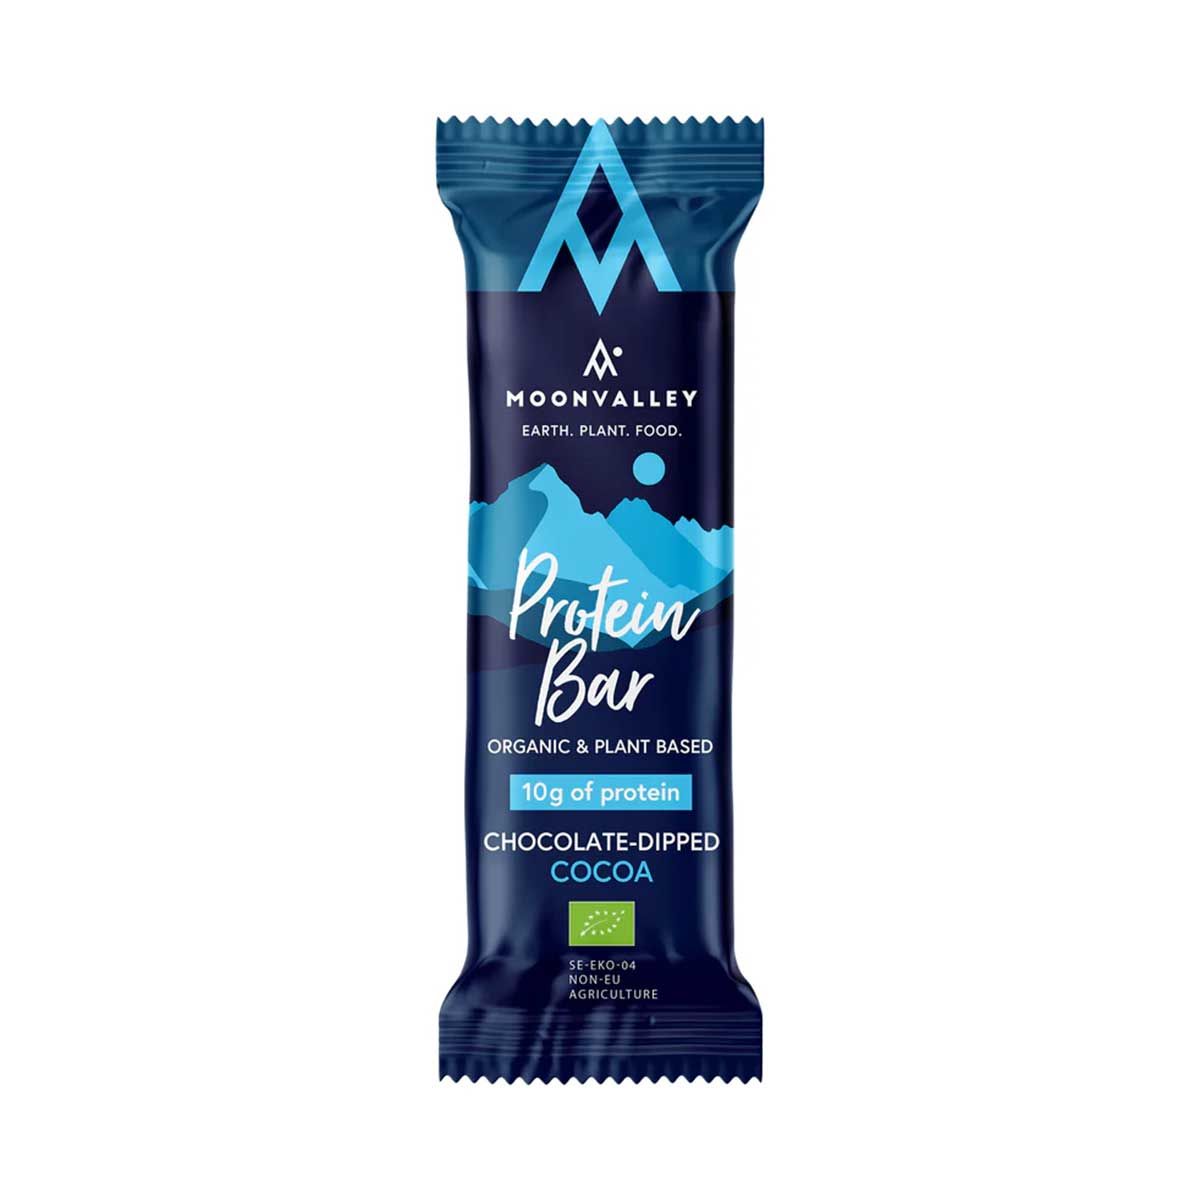 Moonvalley organic protein bar - Chocolate coated with chocolate